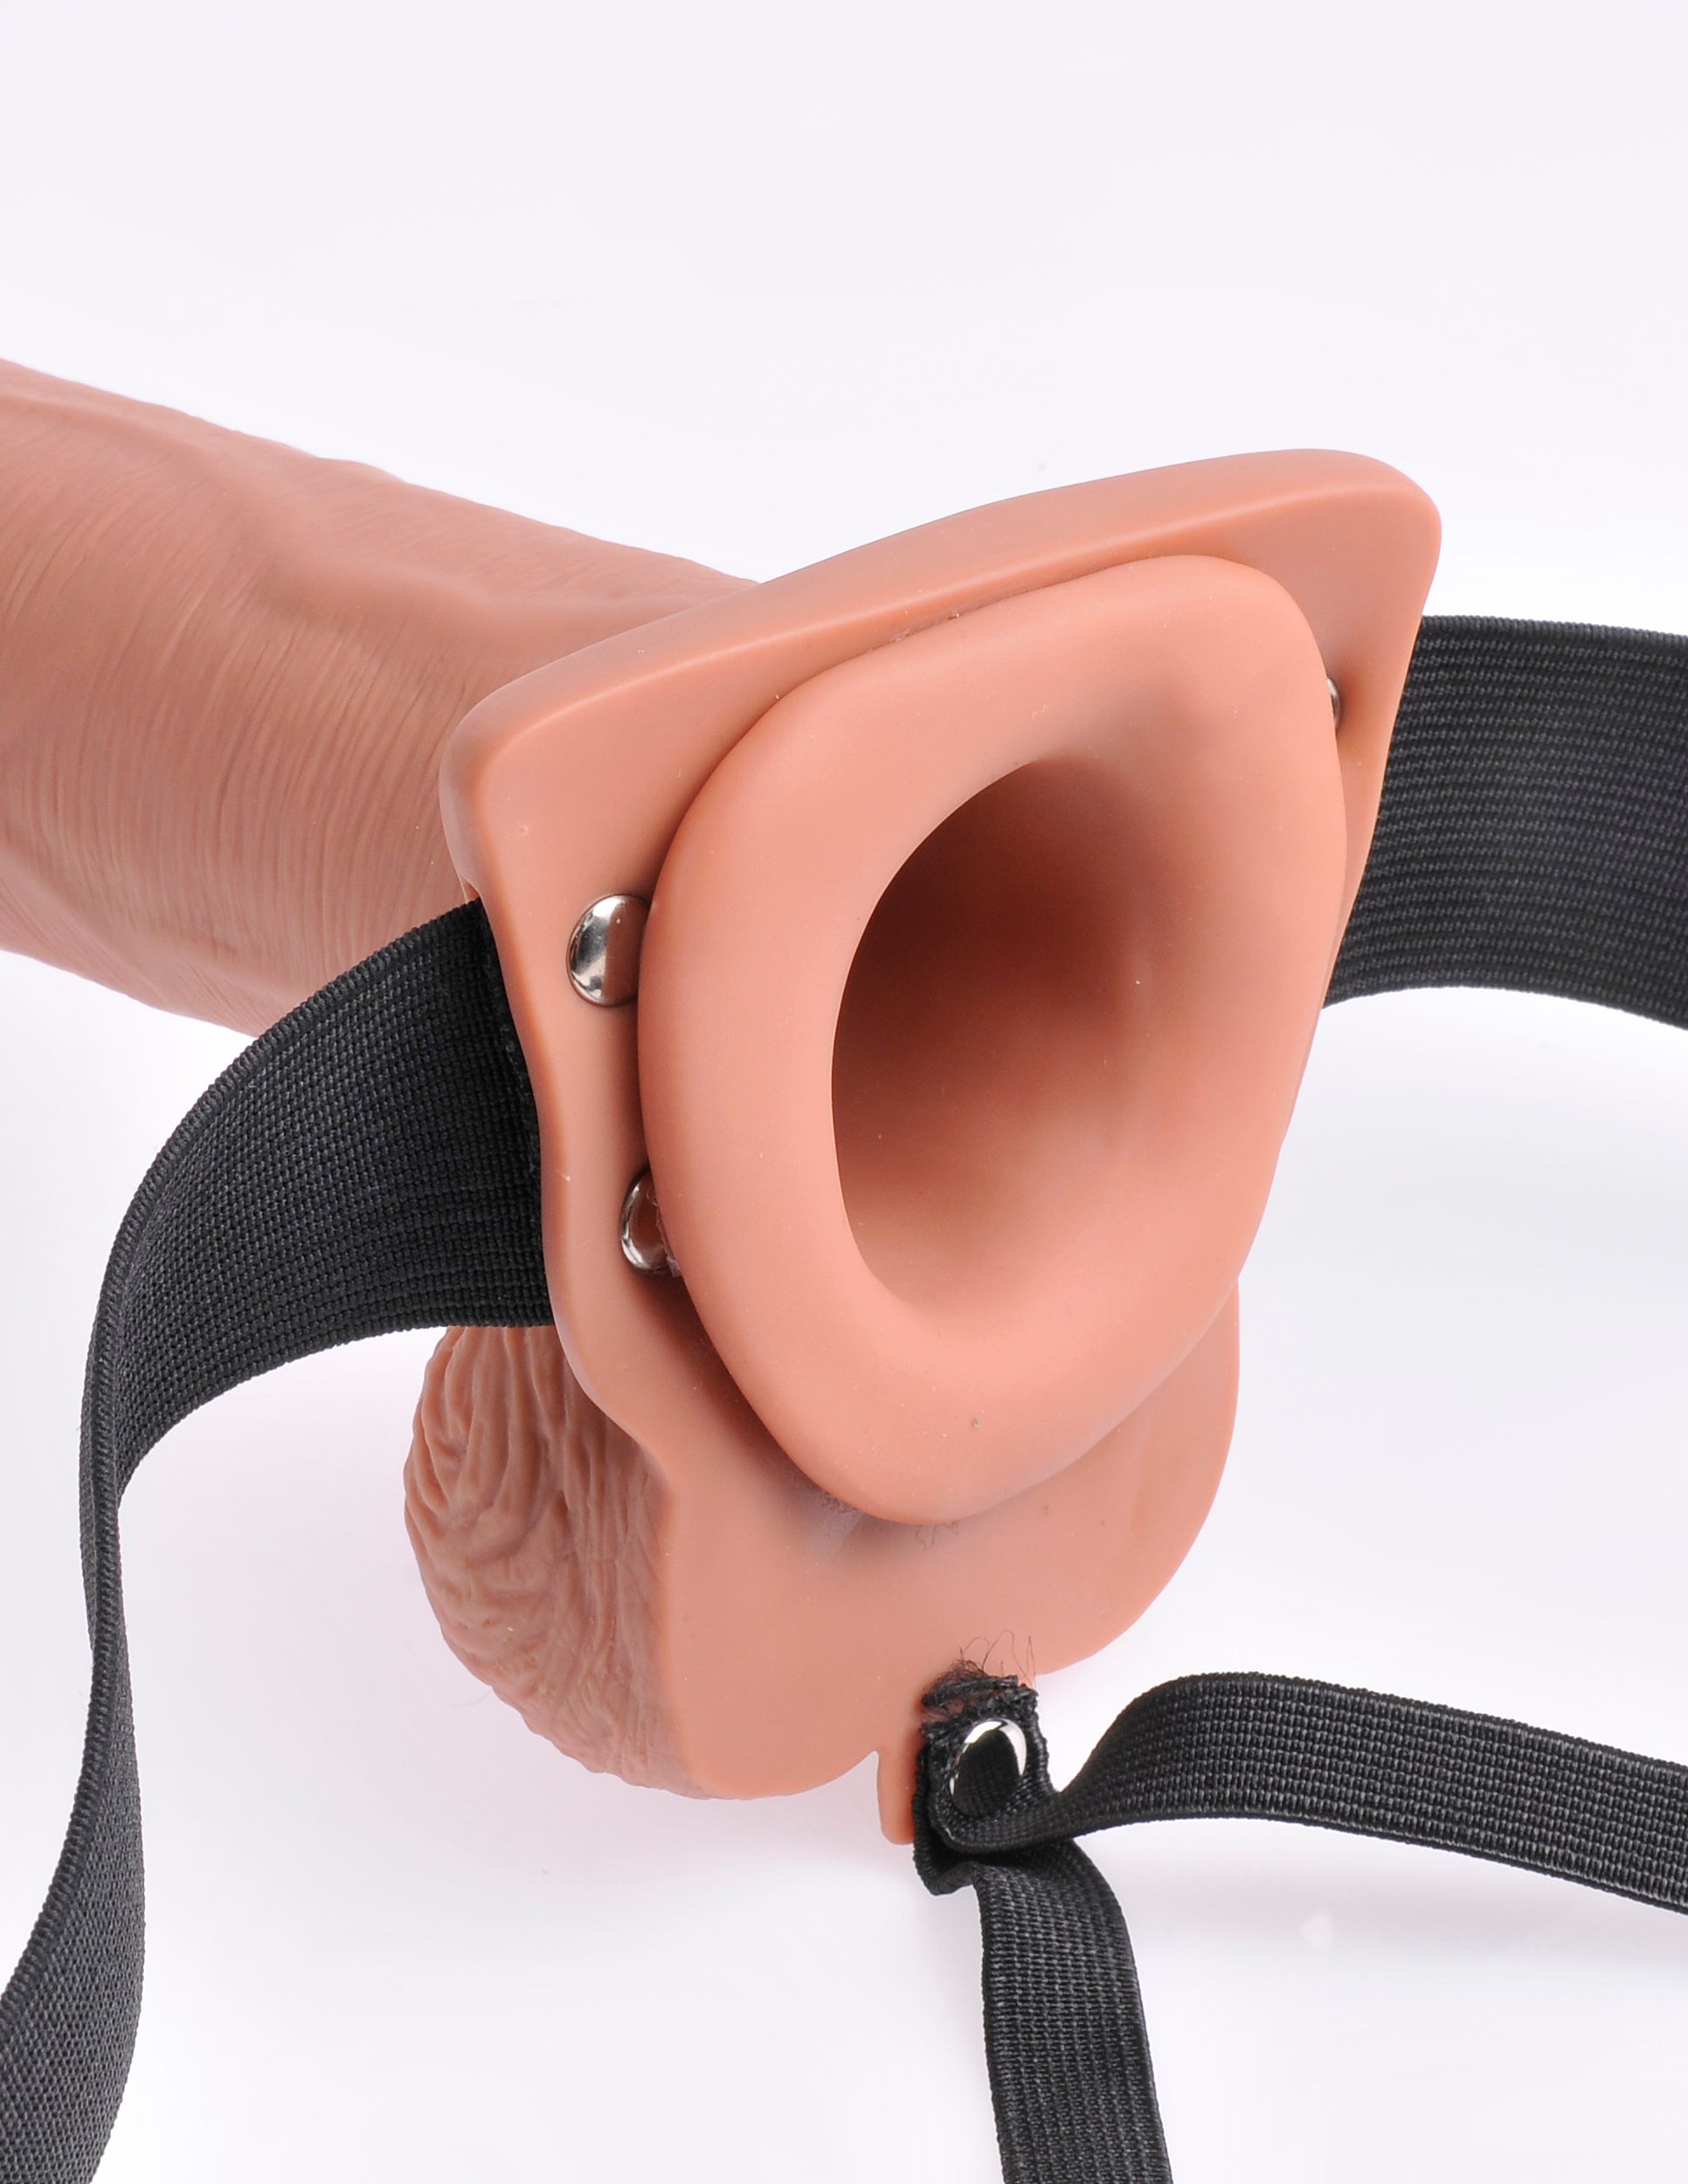 (wd) Fetish Fantasy 10 In Holl Rechargeable Strap-on Remote Tan